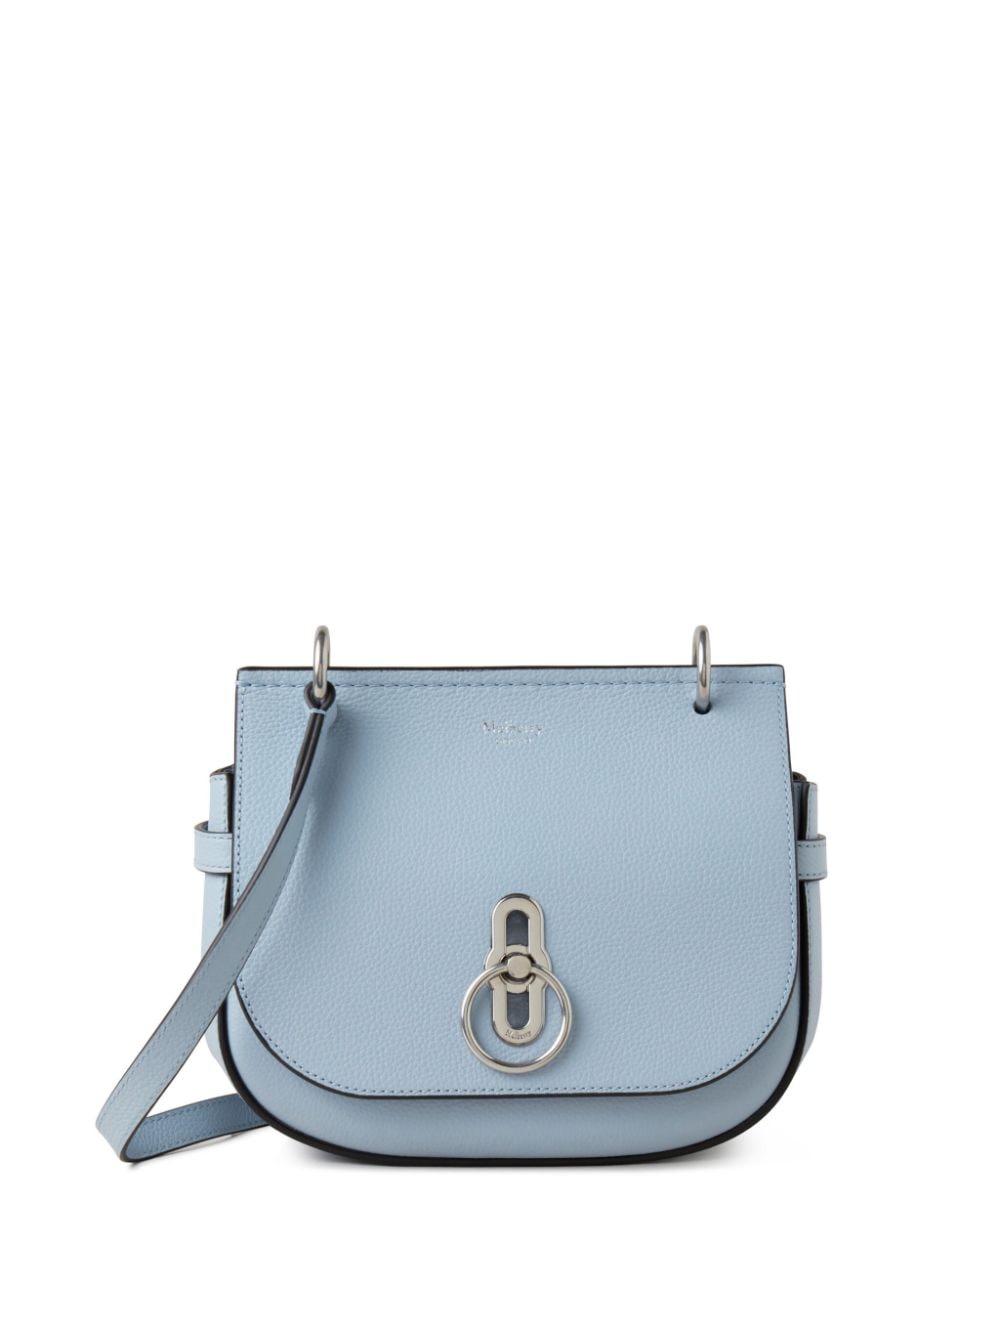 Mulberry small Amberley leather satchel - Blue von Mulberry